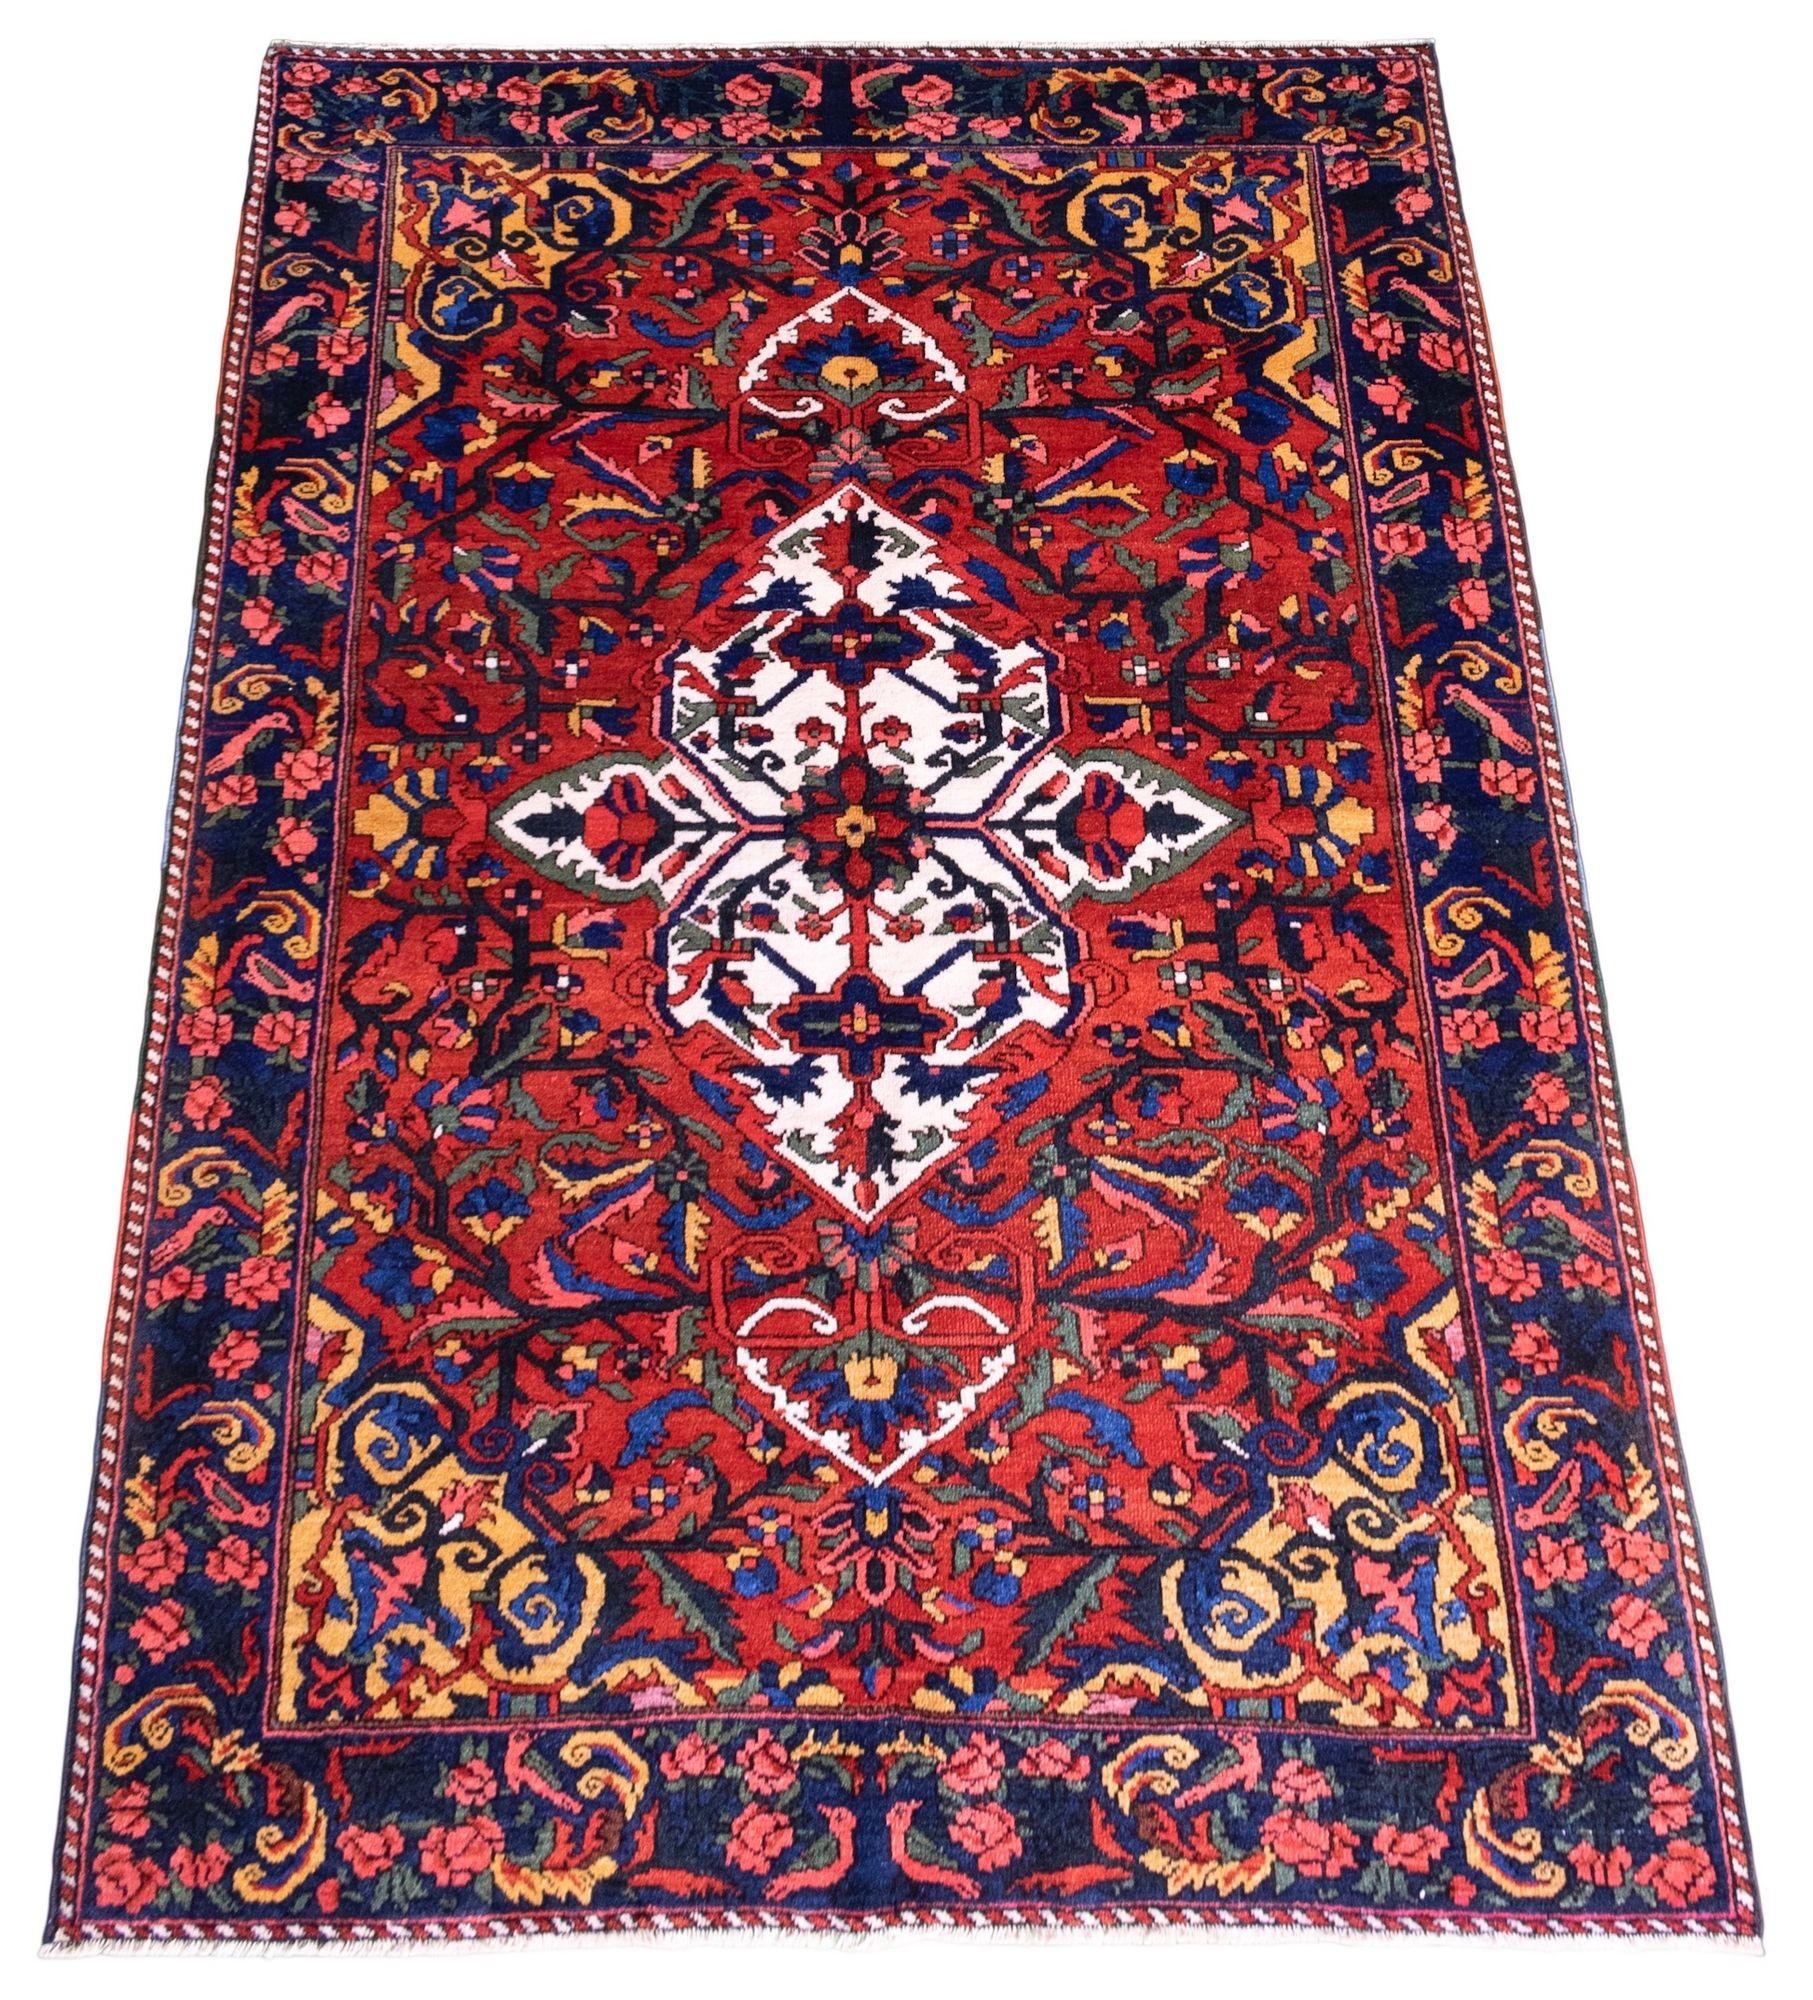 A beautiful antique Bakhtiar rug, hand woven circa 1920 with a single medallion floral design on a terracotta field and indigo border. Wonderful secondary colours of greens, pinks and golds and a highly decorative antique rug.
Size: 2.05m x 1.46m